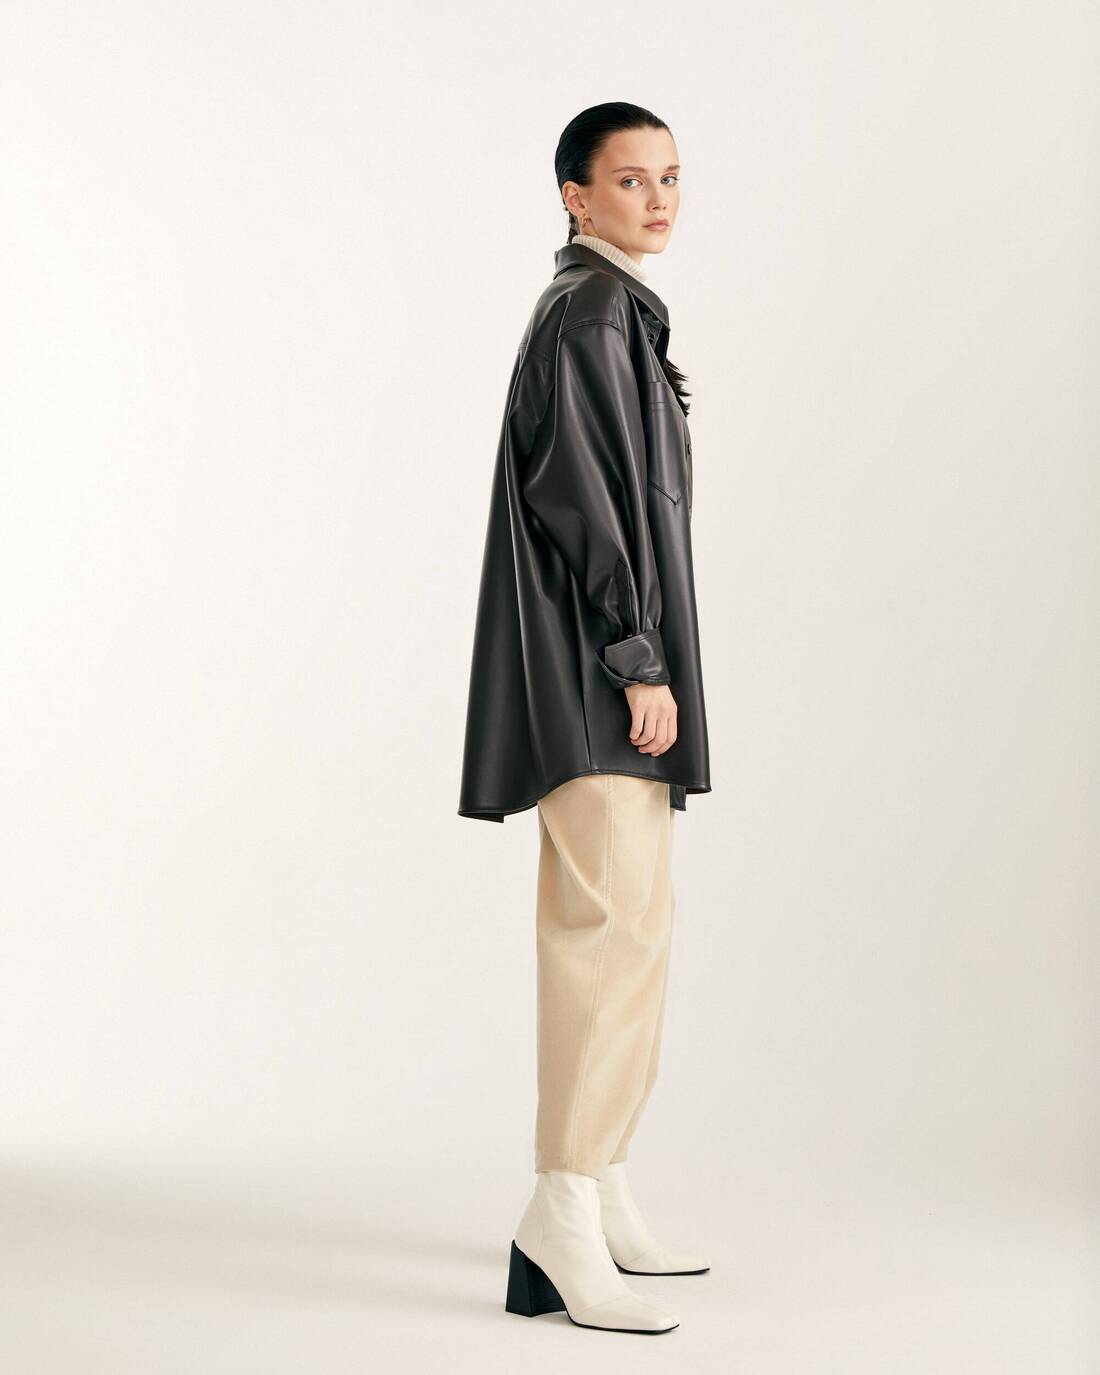 Oversized shirt from eco leather 